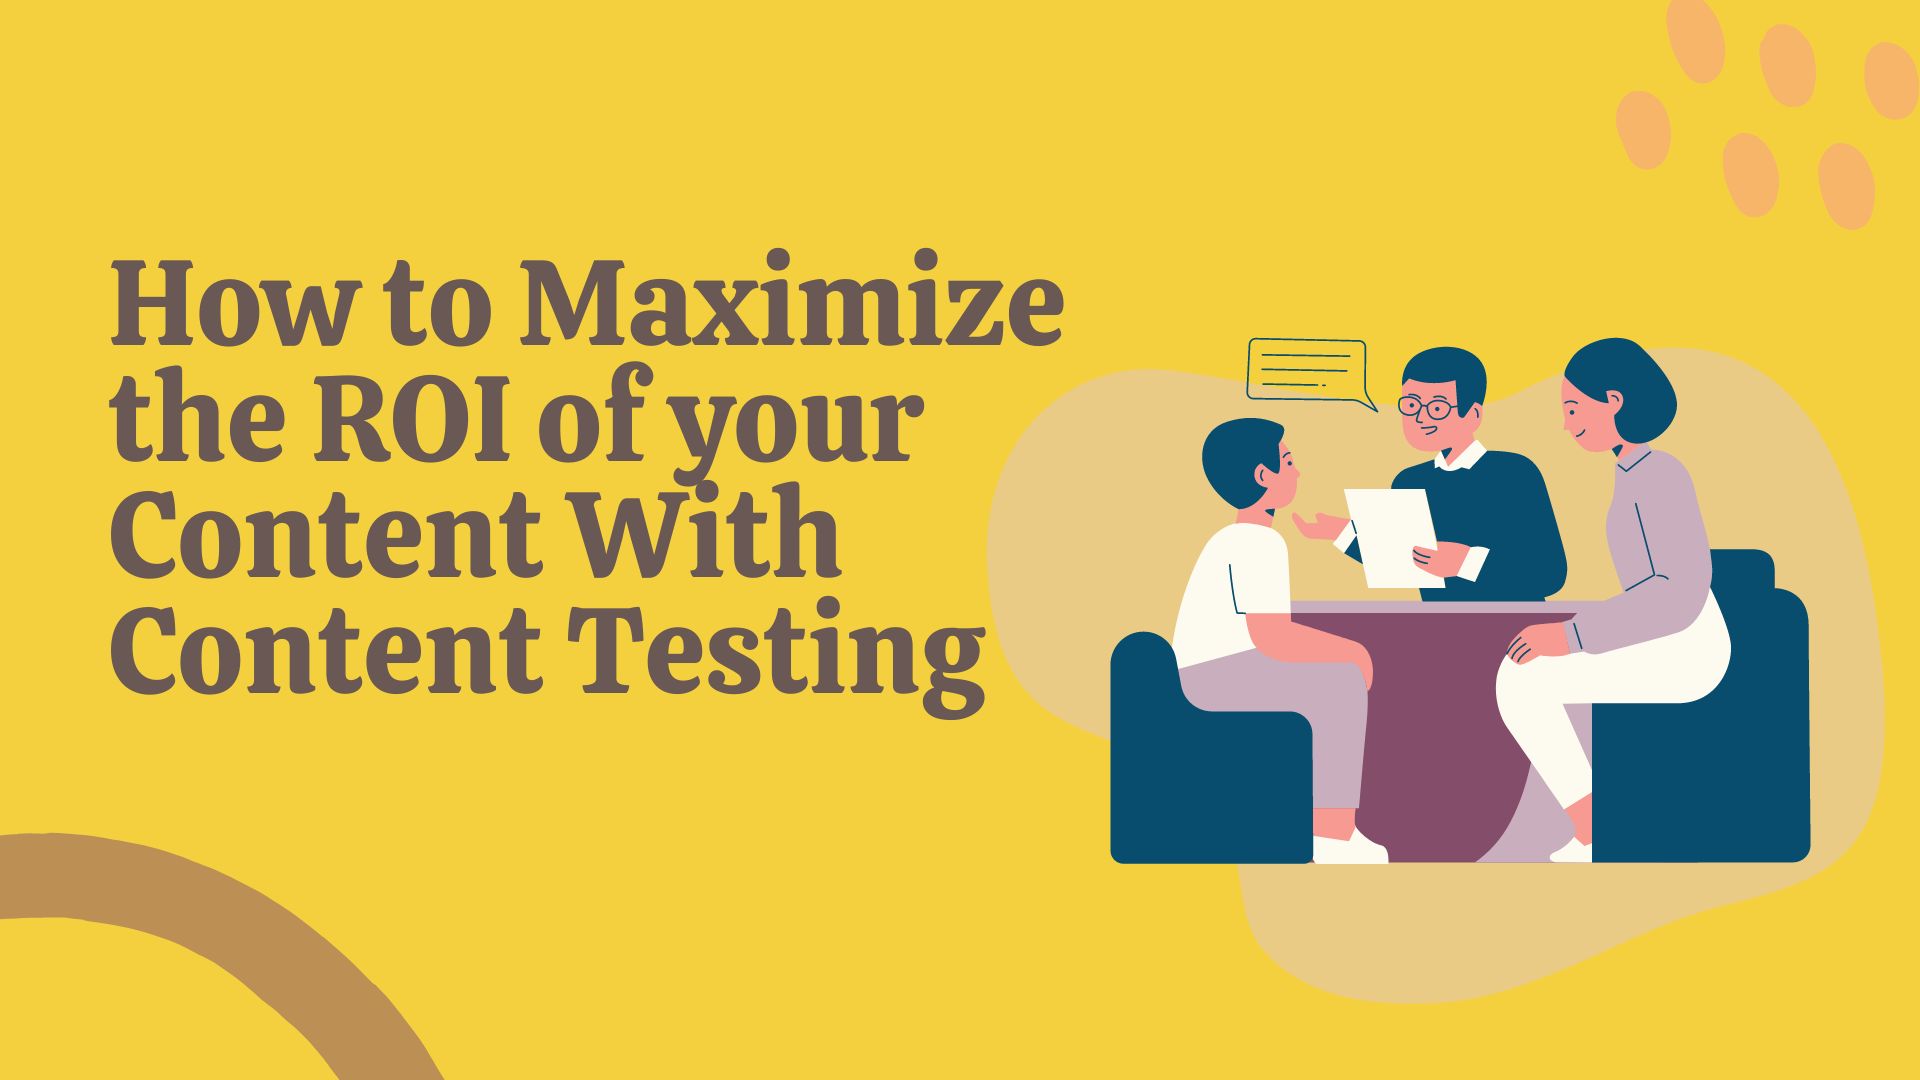 How to Maximize the ROI of your Content With Content Testing